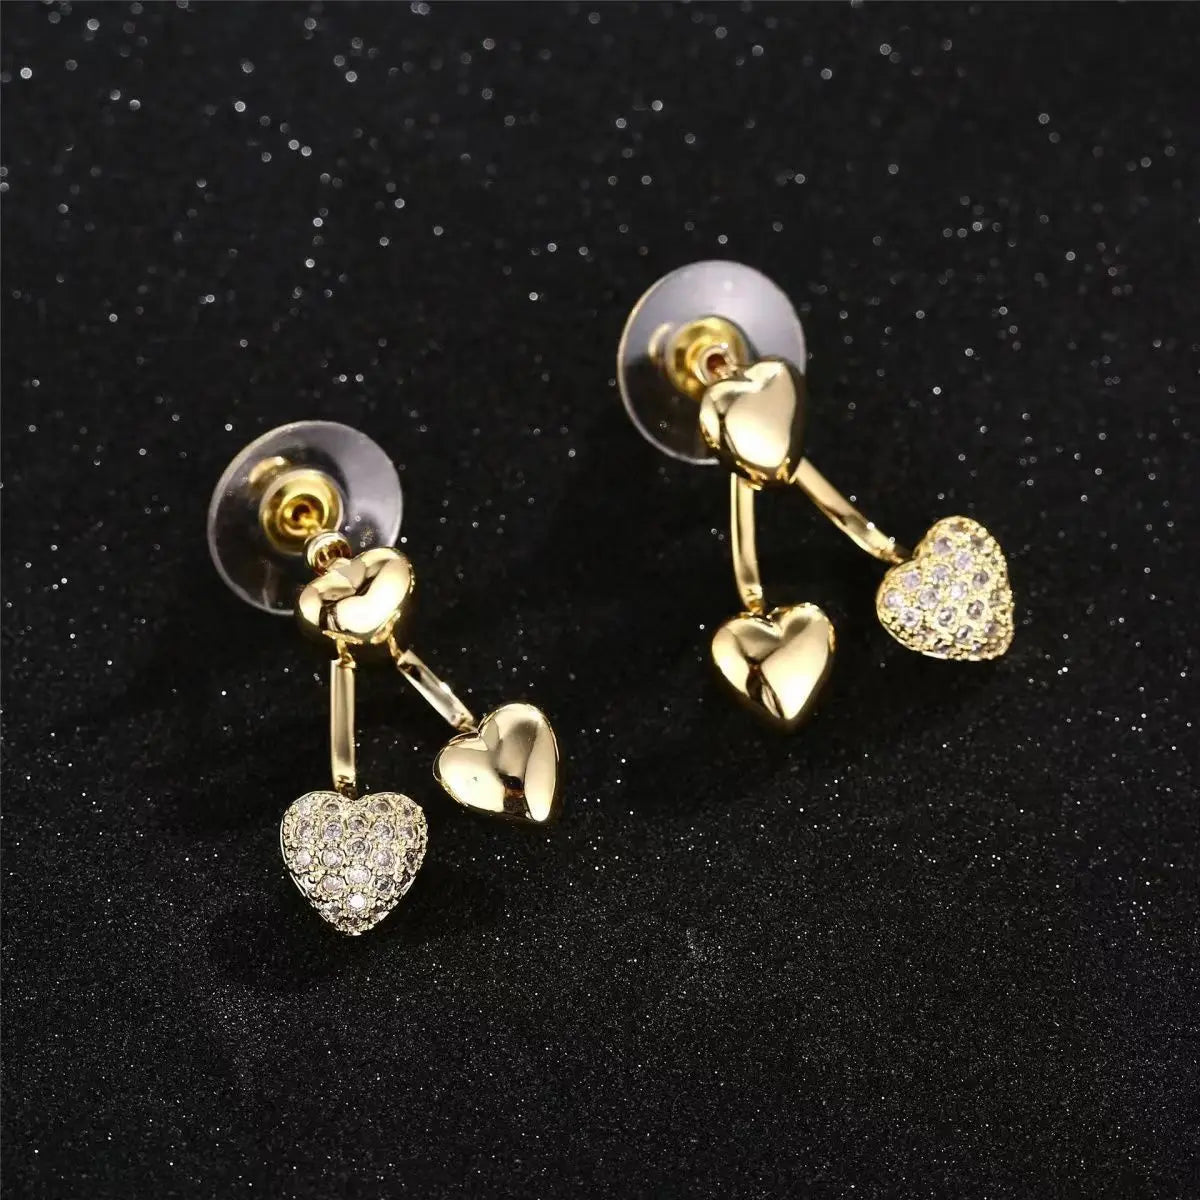 Korean Fashion Exquisite Silver Needle Loveheart Earrings Romantic Wedding Commemorative for Gift Outstanding Women's Jewelry